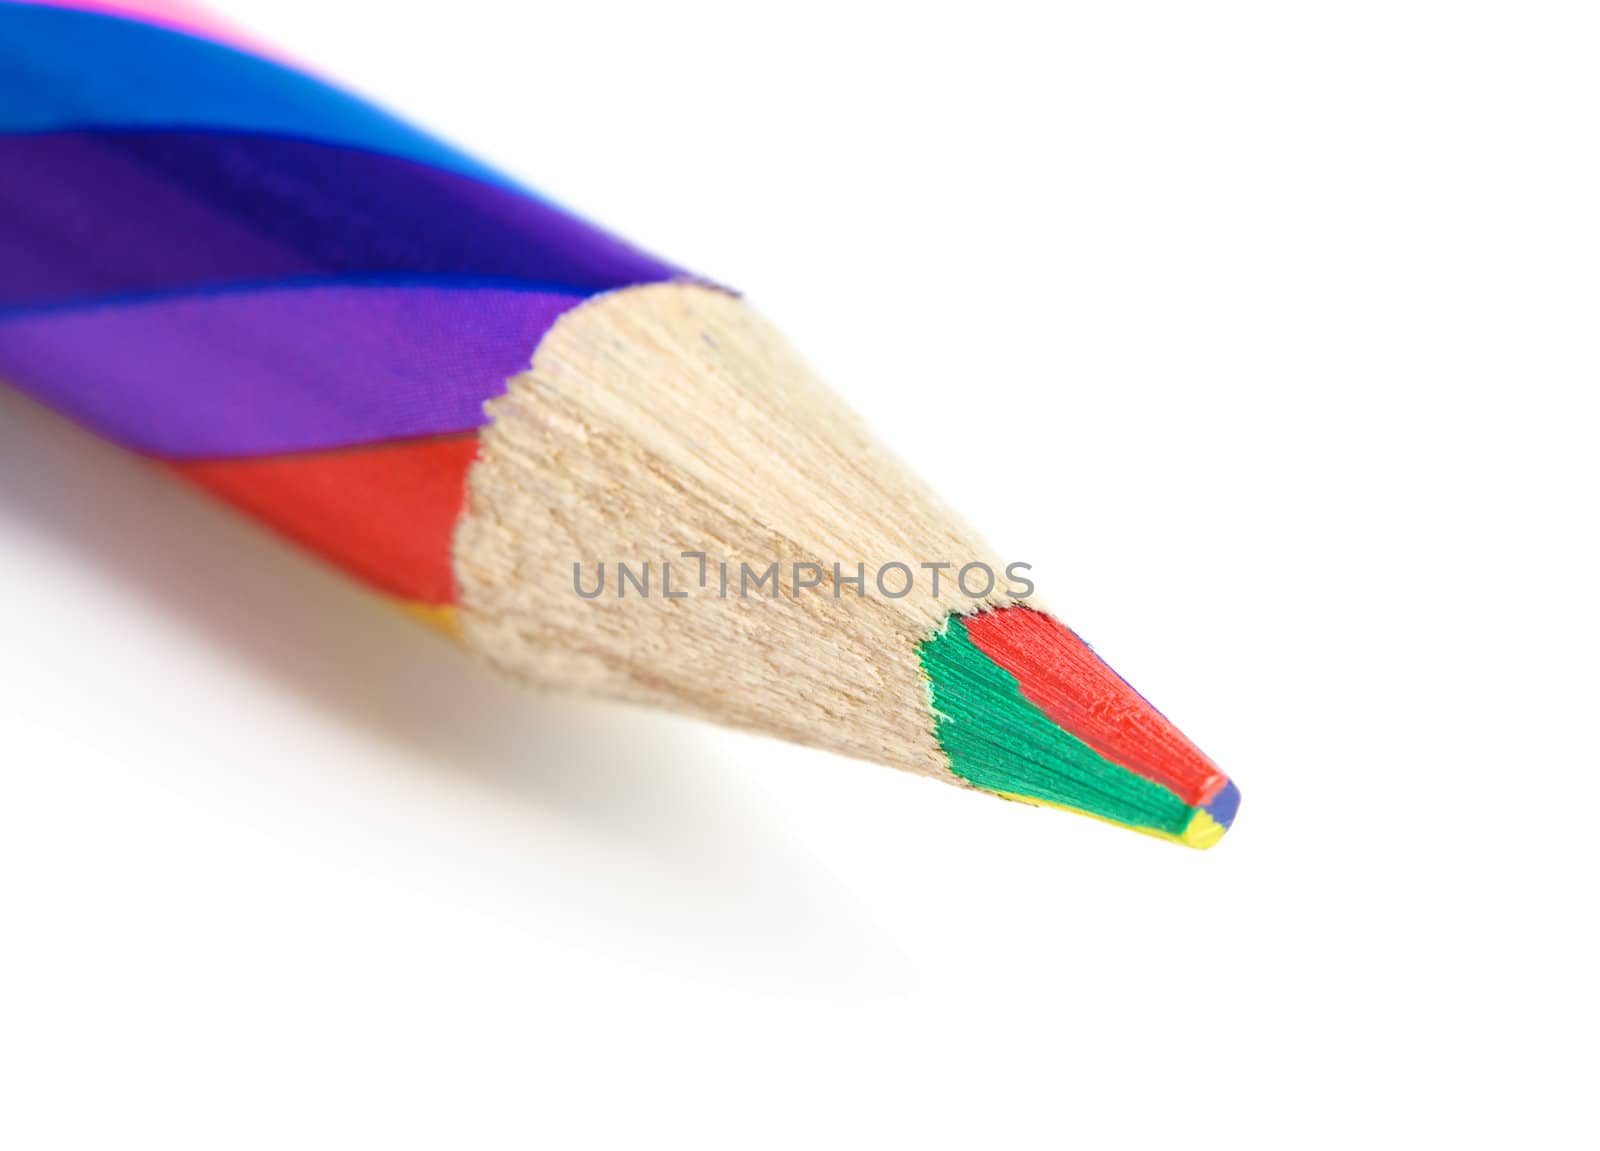 Colorful Pencil by petr_malyshev